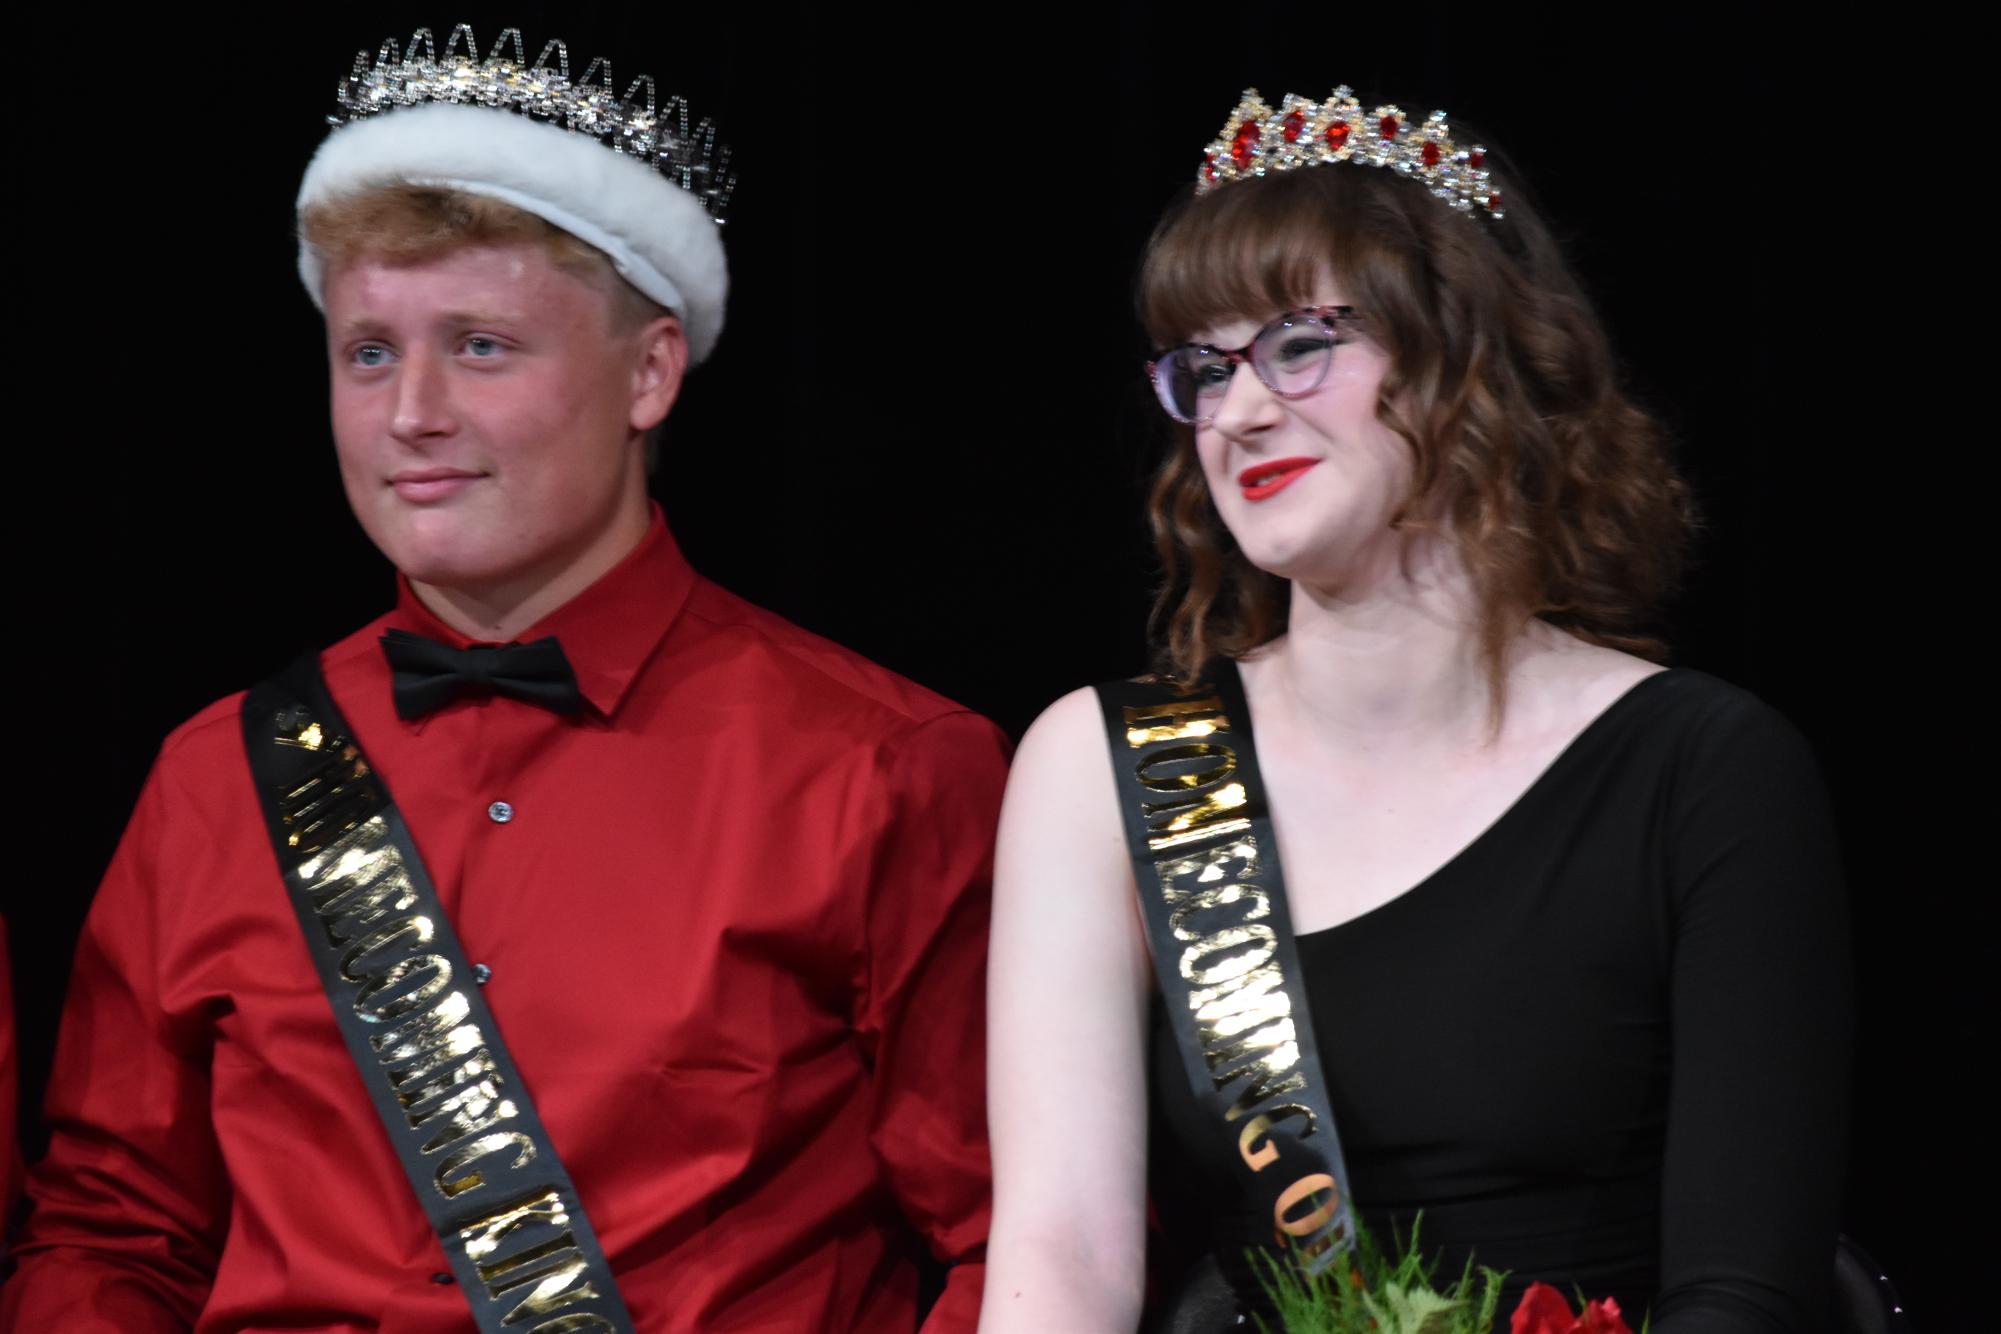 King Dylan Banks and Queen Meagan Pedersen took their thrones after they were crowned.